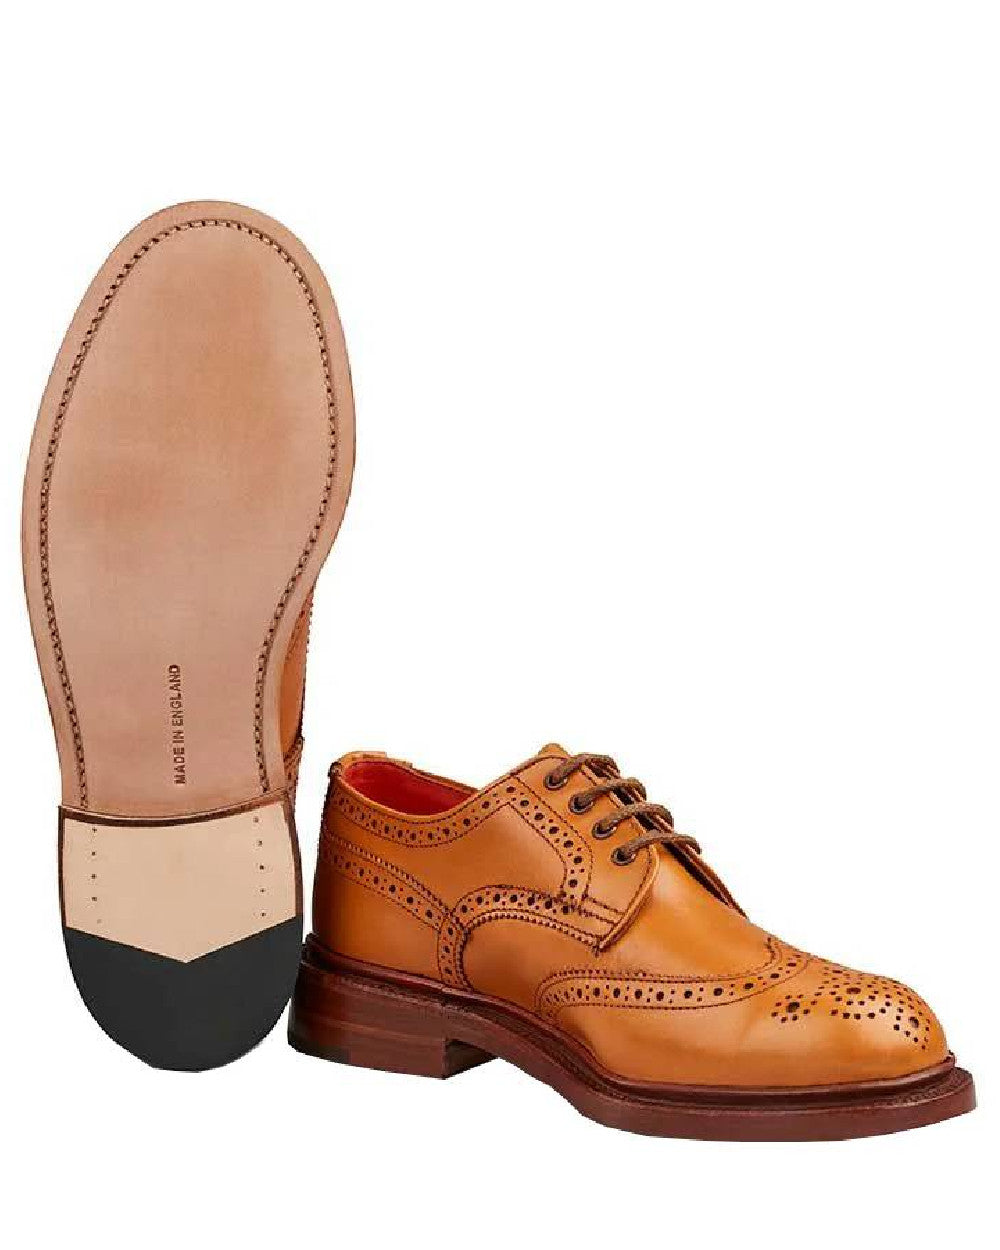 Acorn Antique Coloured Trickers Anne Leather Sole Brogue Country Shoe On A White Background 